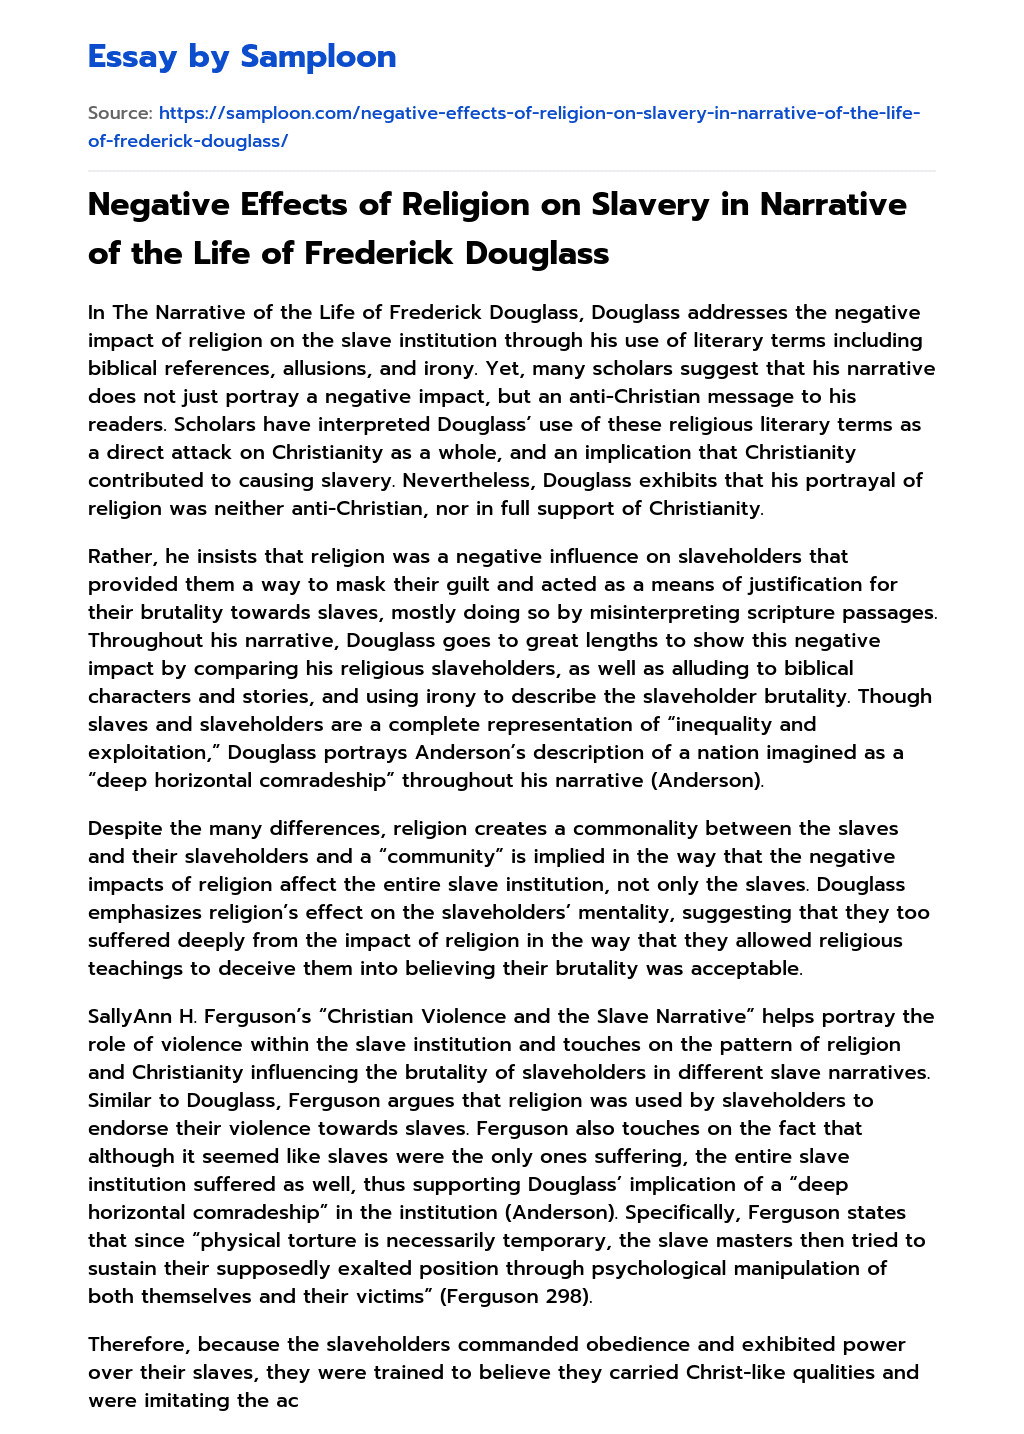 Negative Effects of Religion on Slavery in Narrative of the Life of Frederick Douglass essay